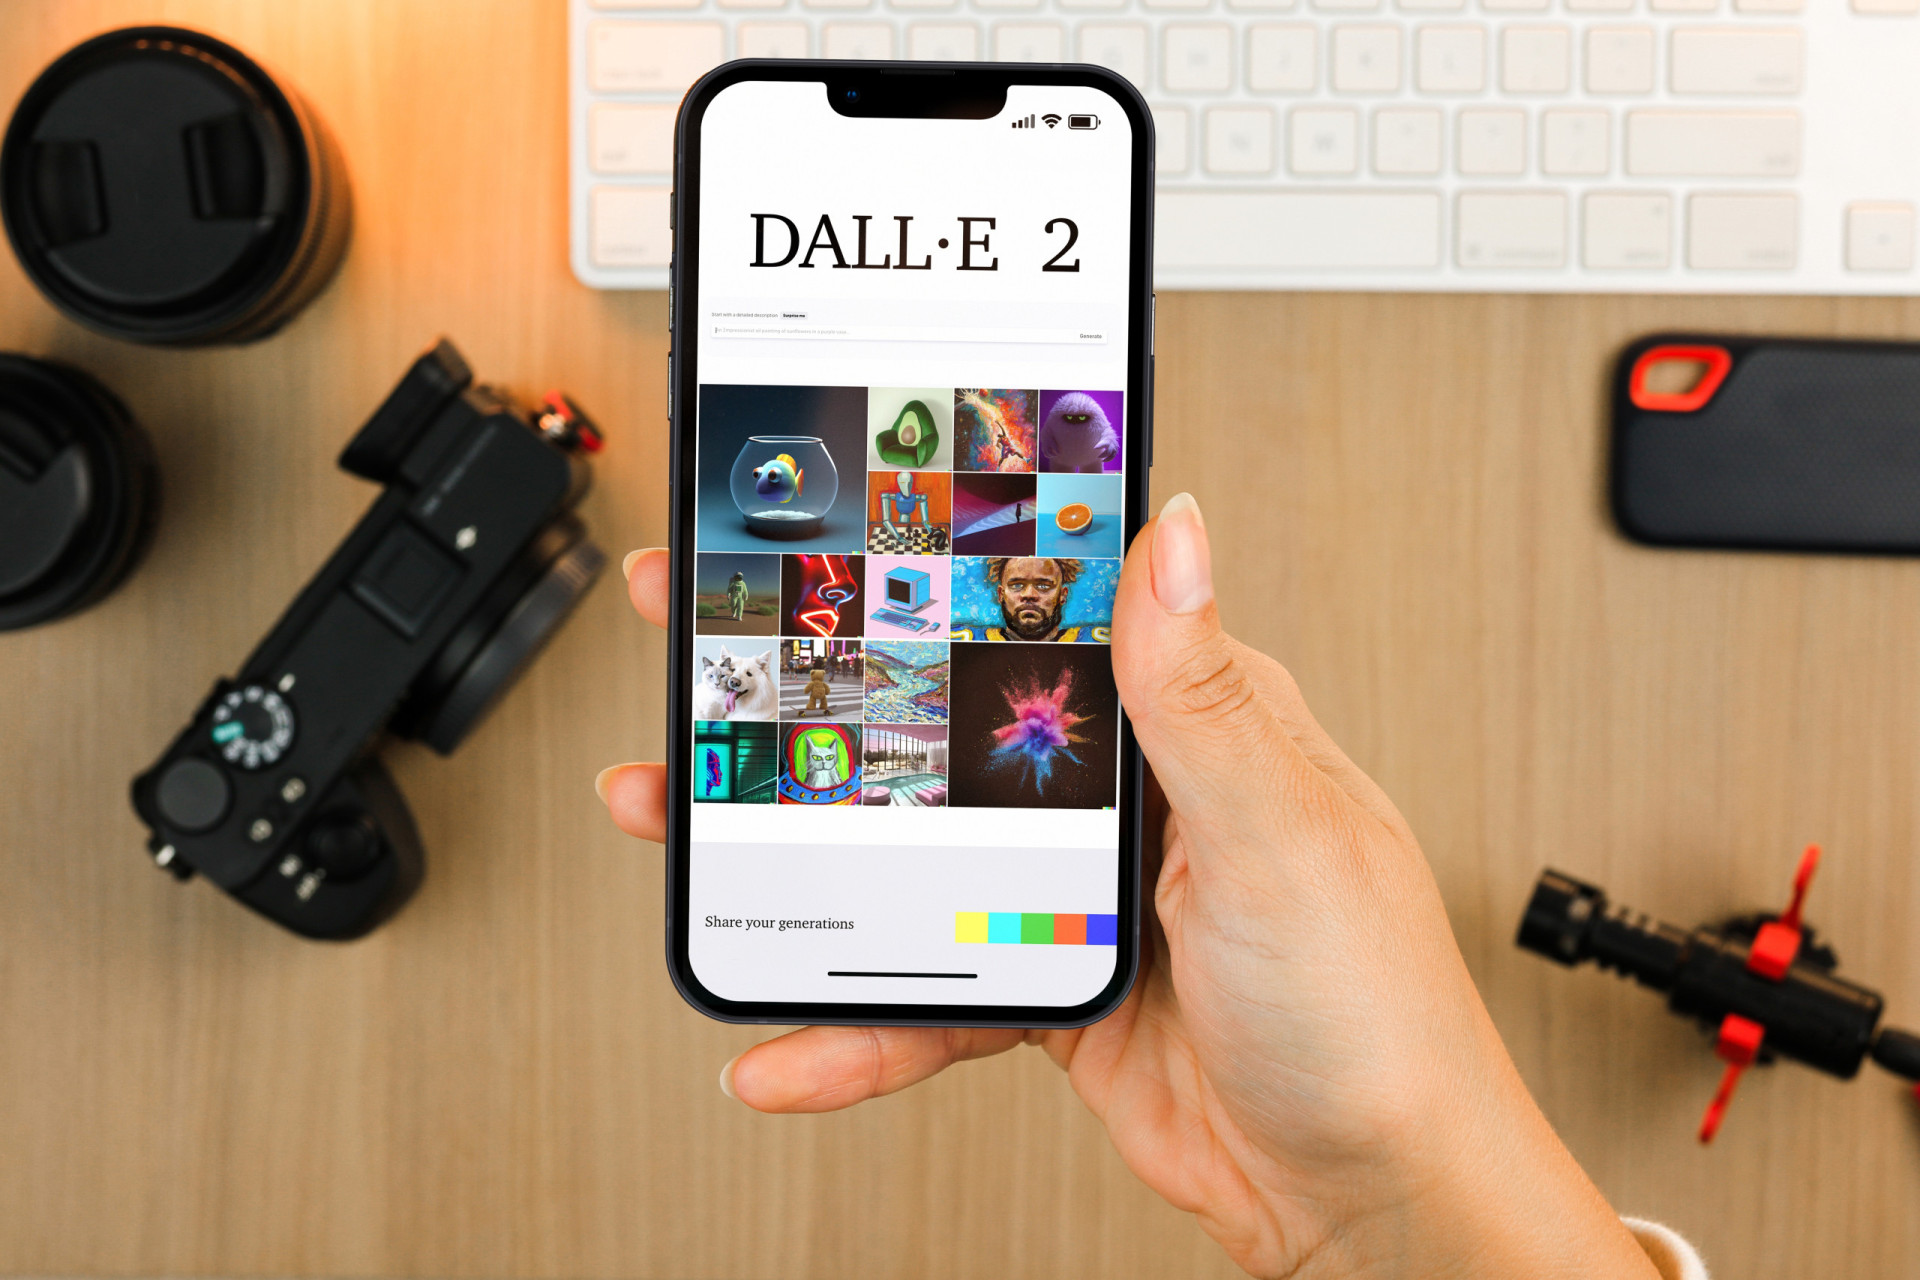 <p>OpenAI also launched their image generator AI system DALL-E 2 in November 2022 for developers to build within their apps, with companies like Microsoft already starting to implement it into their software. Similar to ChatGPT, DALL-E 2 requires users to enter a prompt that then turns into an image.</p><p>You may also like:<a href="https://www.starsinsider.com/n/499355?utm_source=msn.com&utm_medium=display&utm_campaign=referral_description&utm_content=535019en-us"> What illuminated the Dark Ages?</a></p>